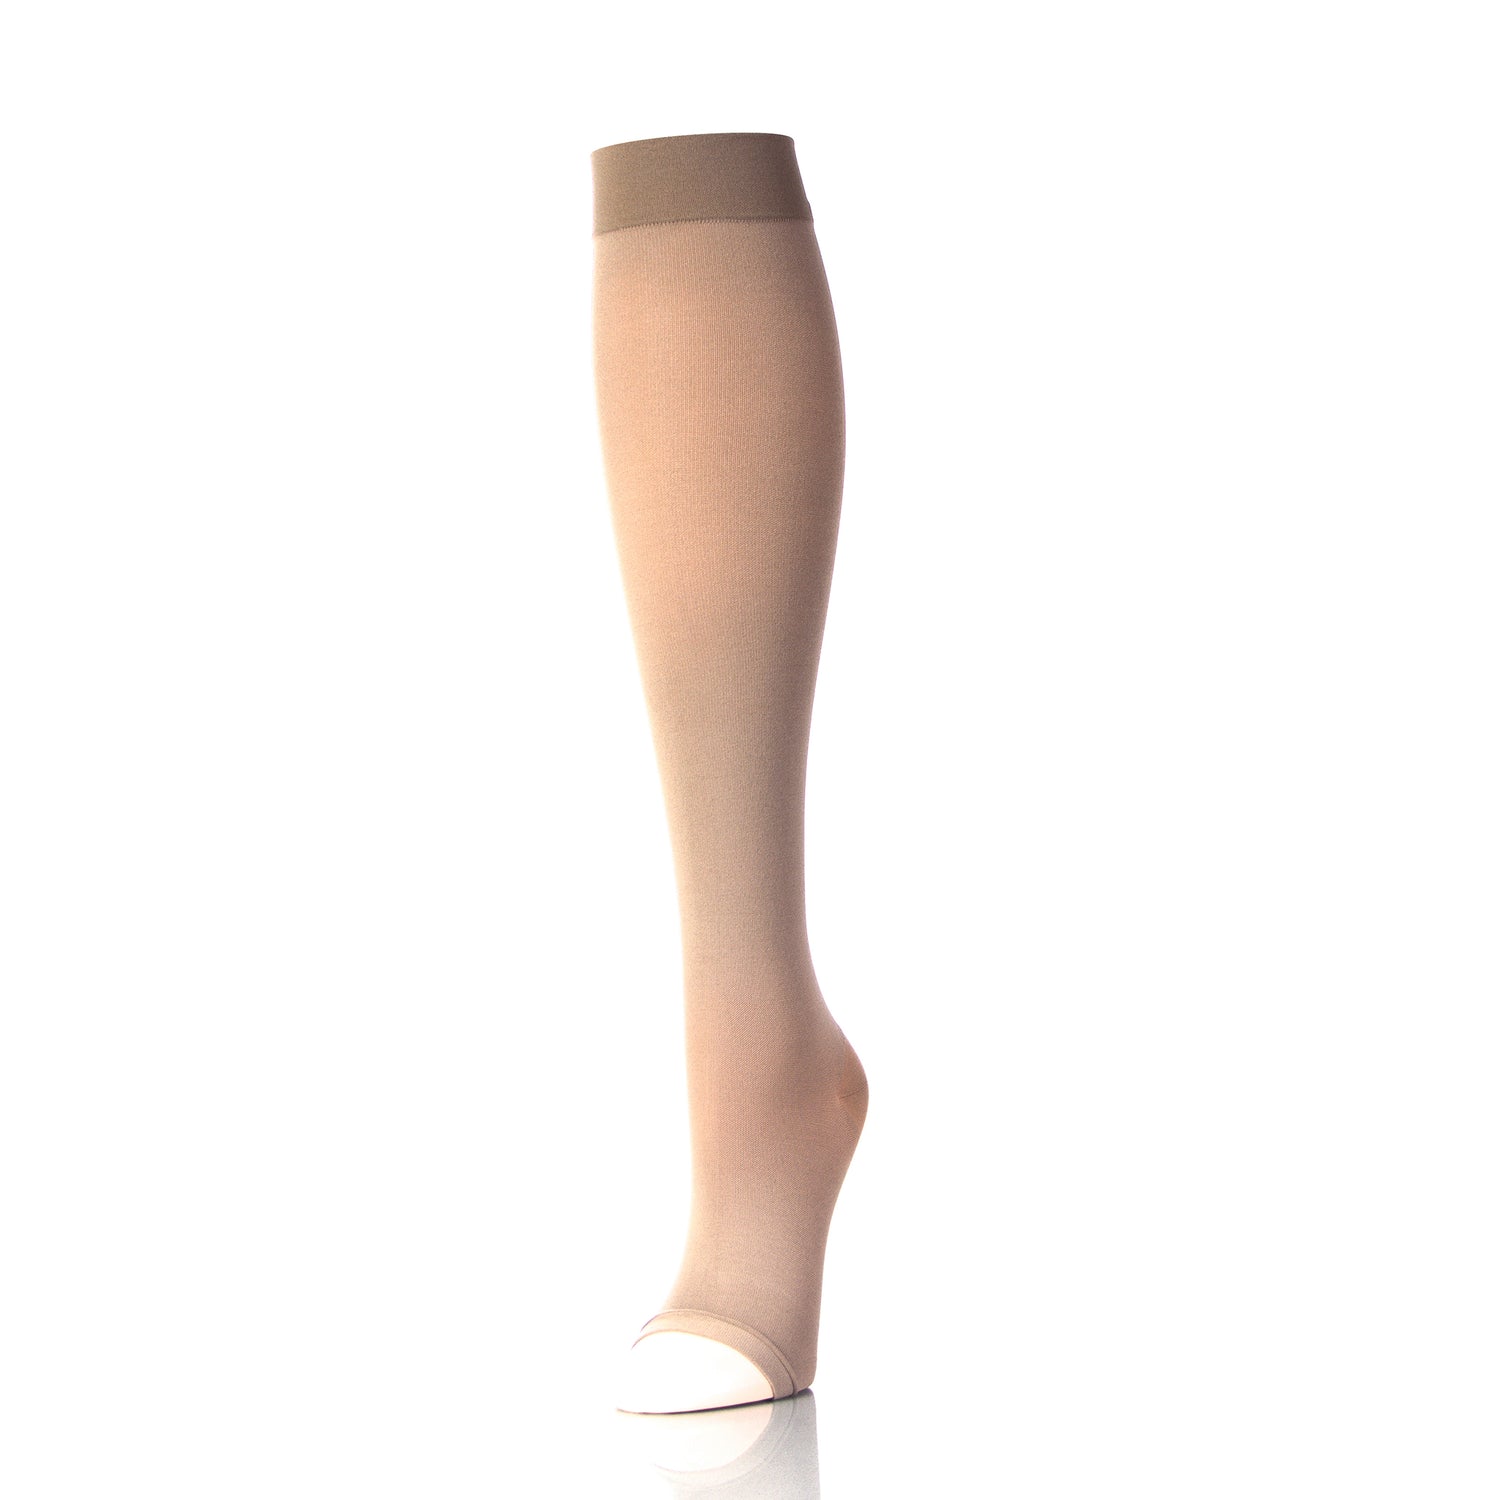 Toeless Compression Socks For Women In 20 30 mmHg CircuTrend